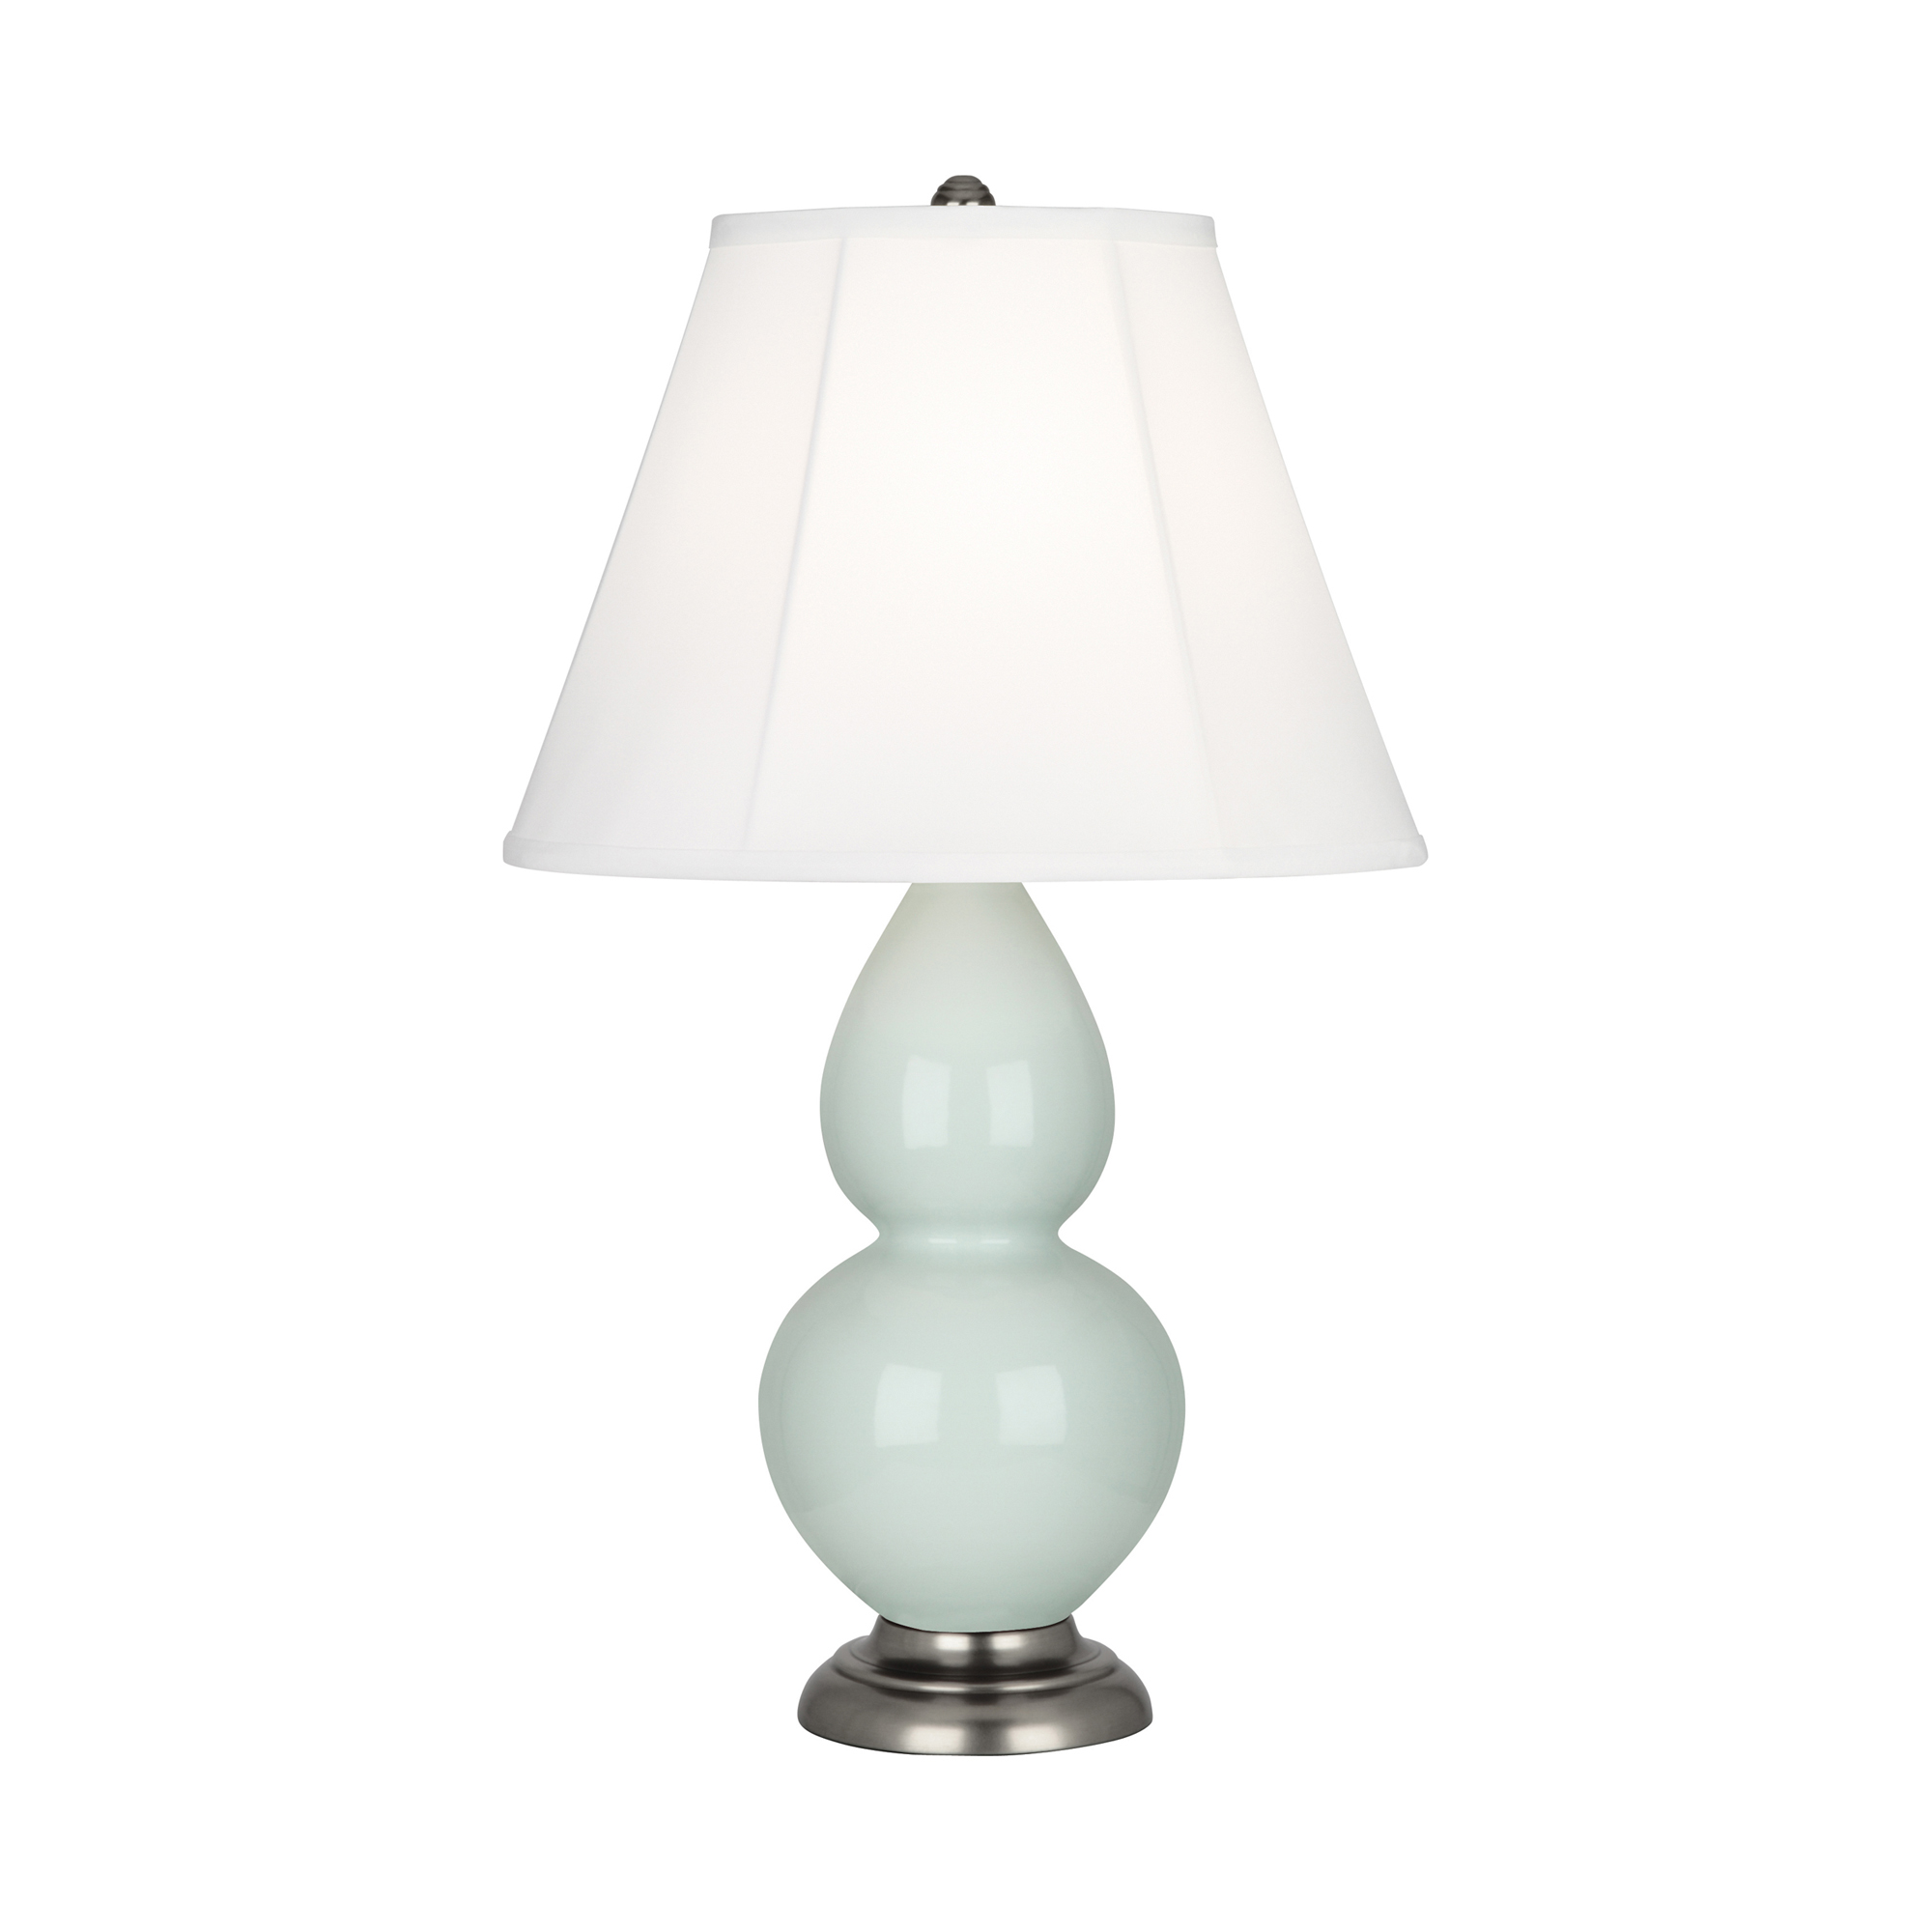 Small Double Gourd Accent Lamp Style #1788